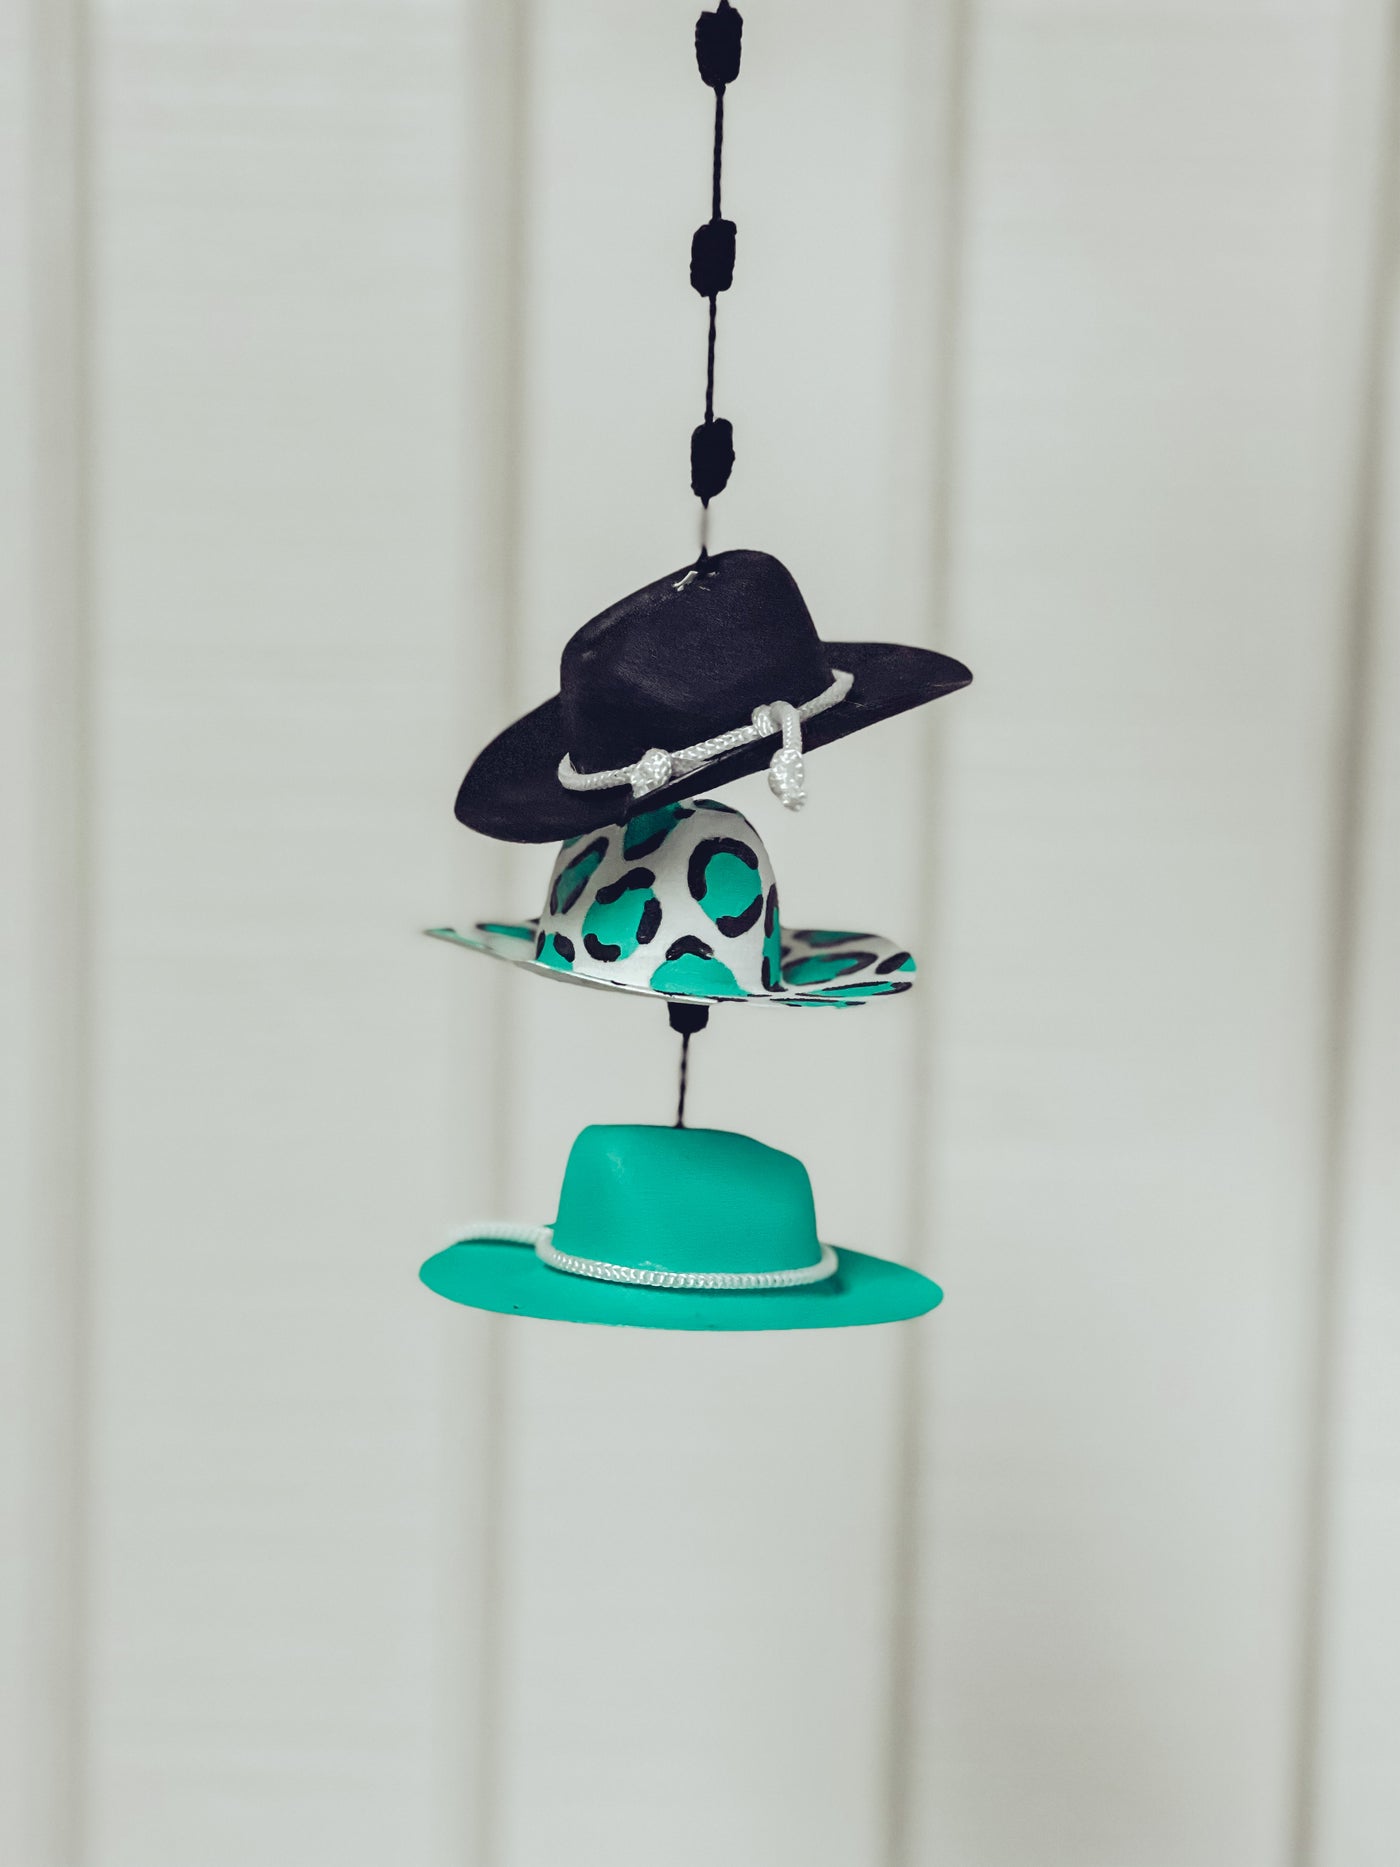 Leopard, Black & Teal- Hat Mirror Hangers-401 CAR ACCESSORIES-Adelyn Elaine's -Adelyn Elaine's Boutique, Women's Clothing Boutique in Gilmer, TX